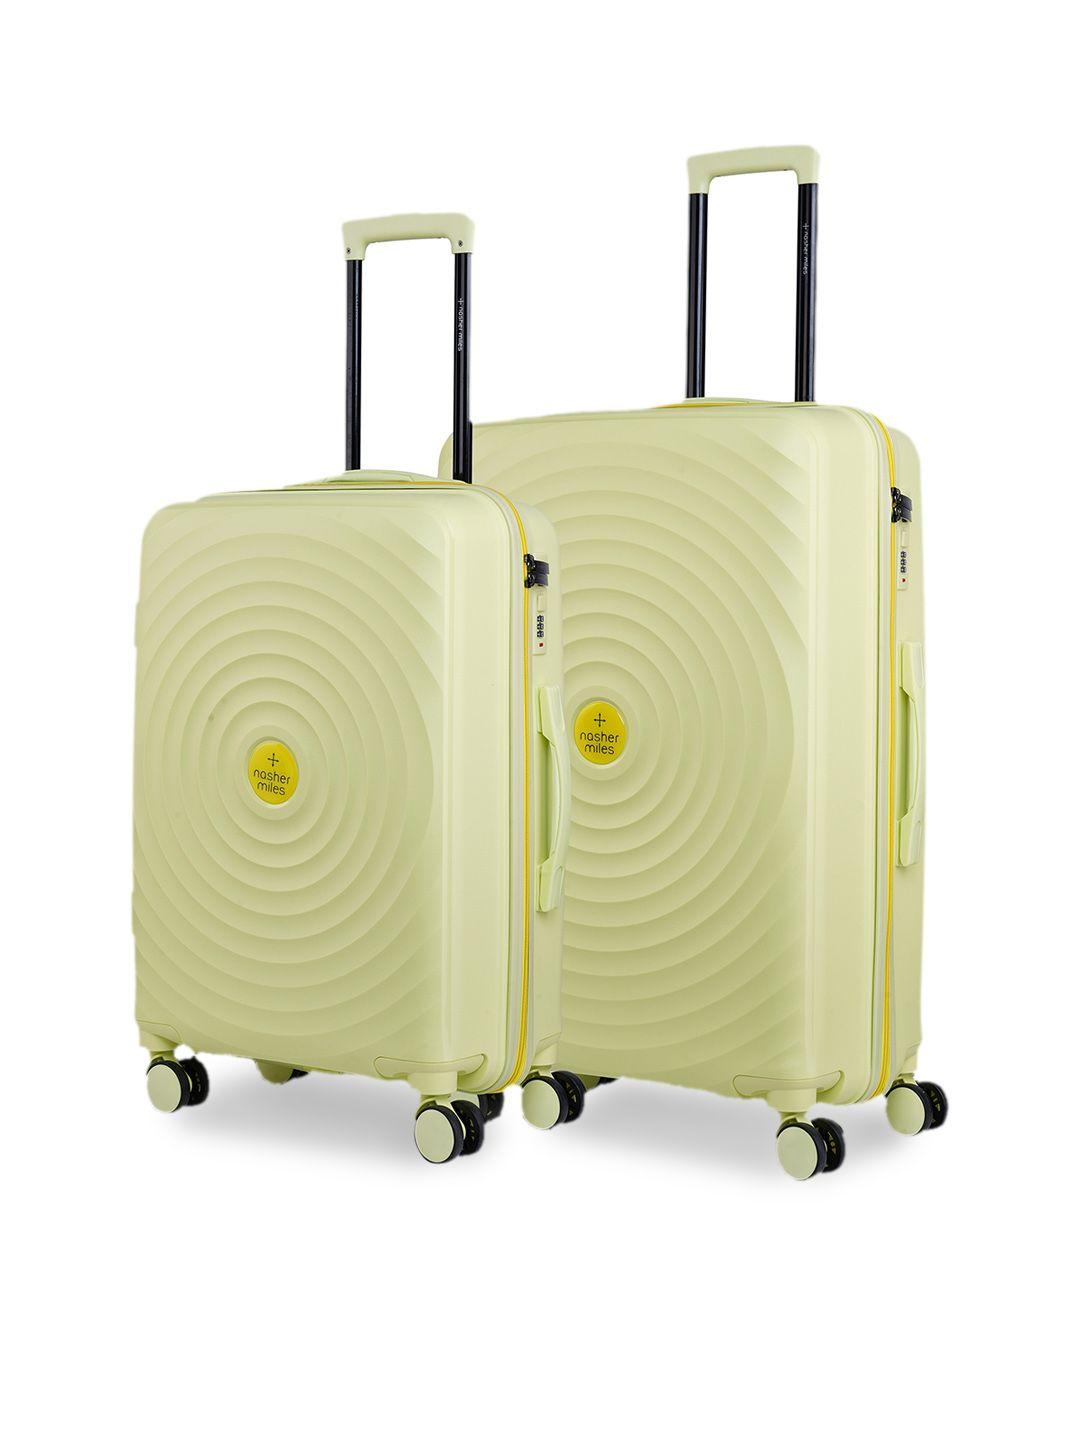 nasher miles set of 2 goa textured hard-sided trolley bags